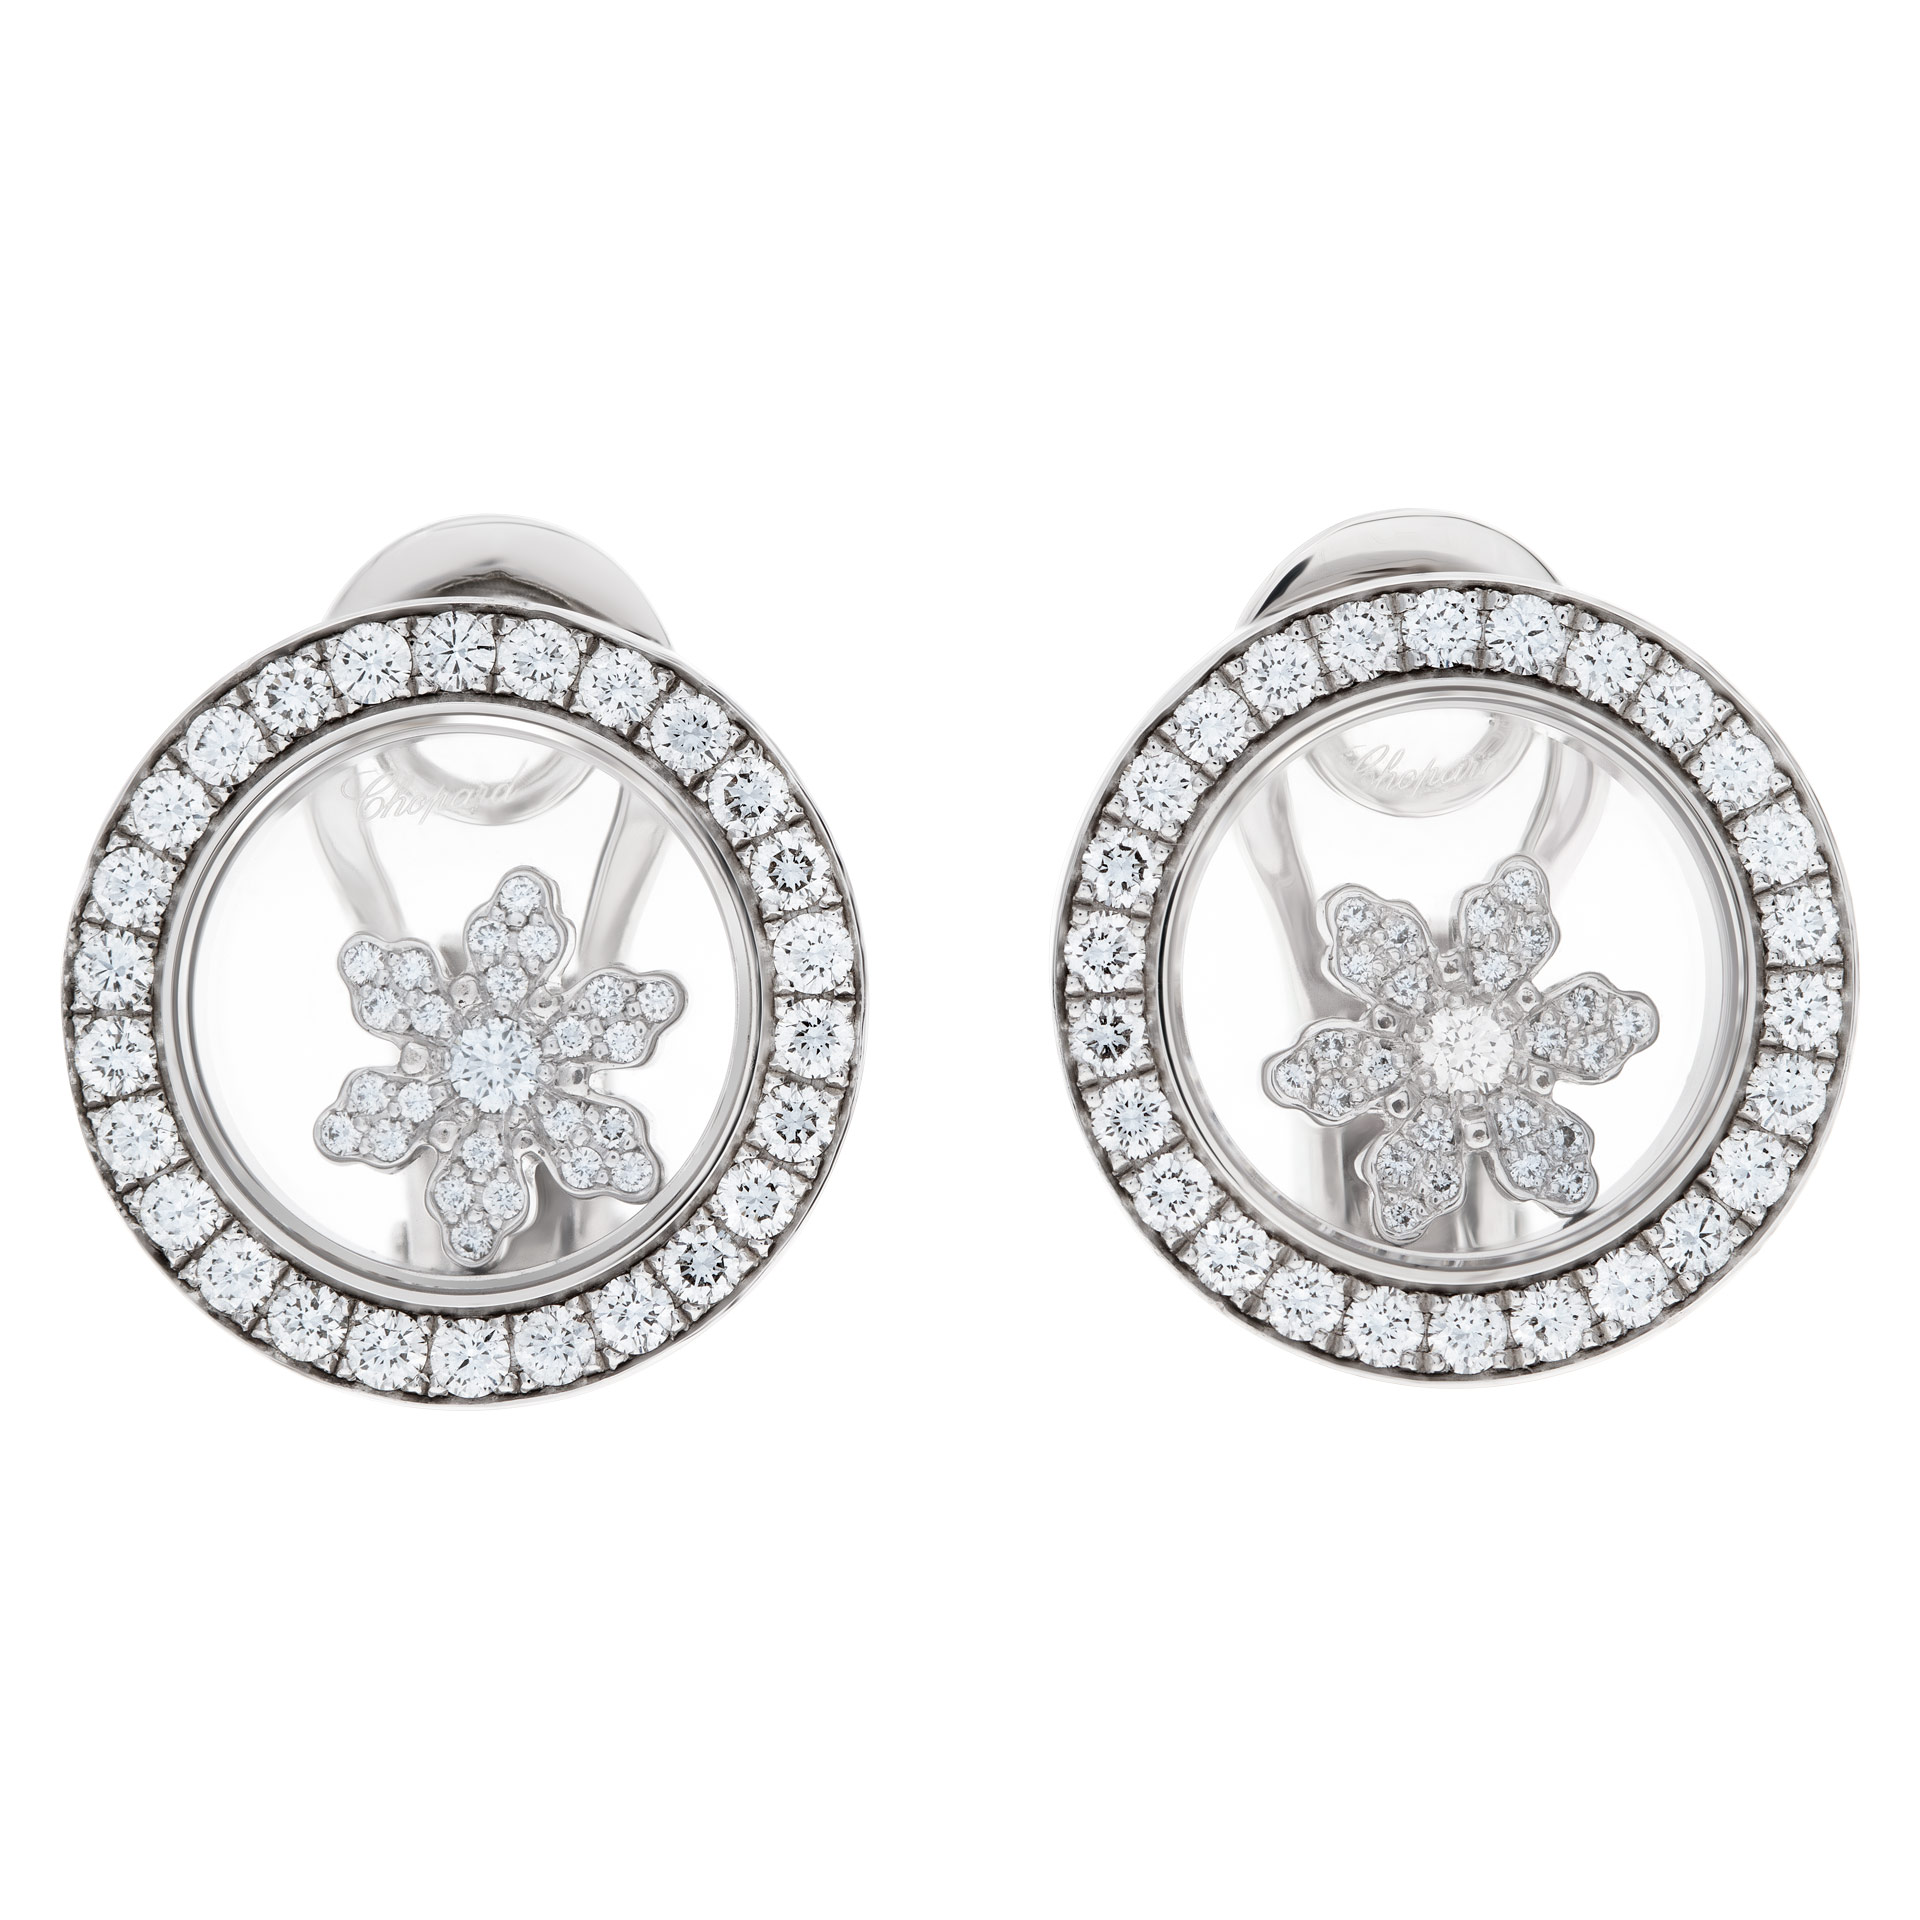 Chopard Happy Sport Snowflake earrings in 18k white gold. 1.06 carats image 1